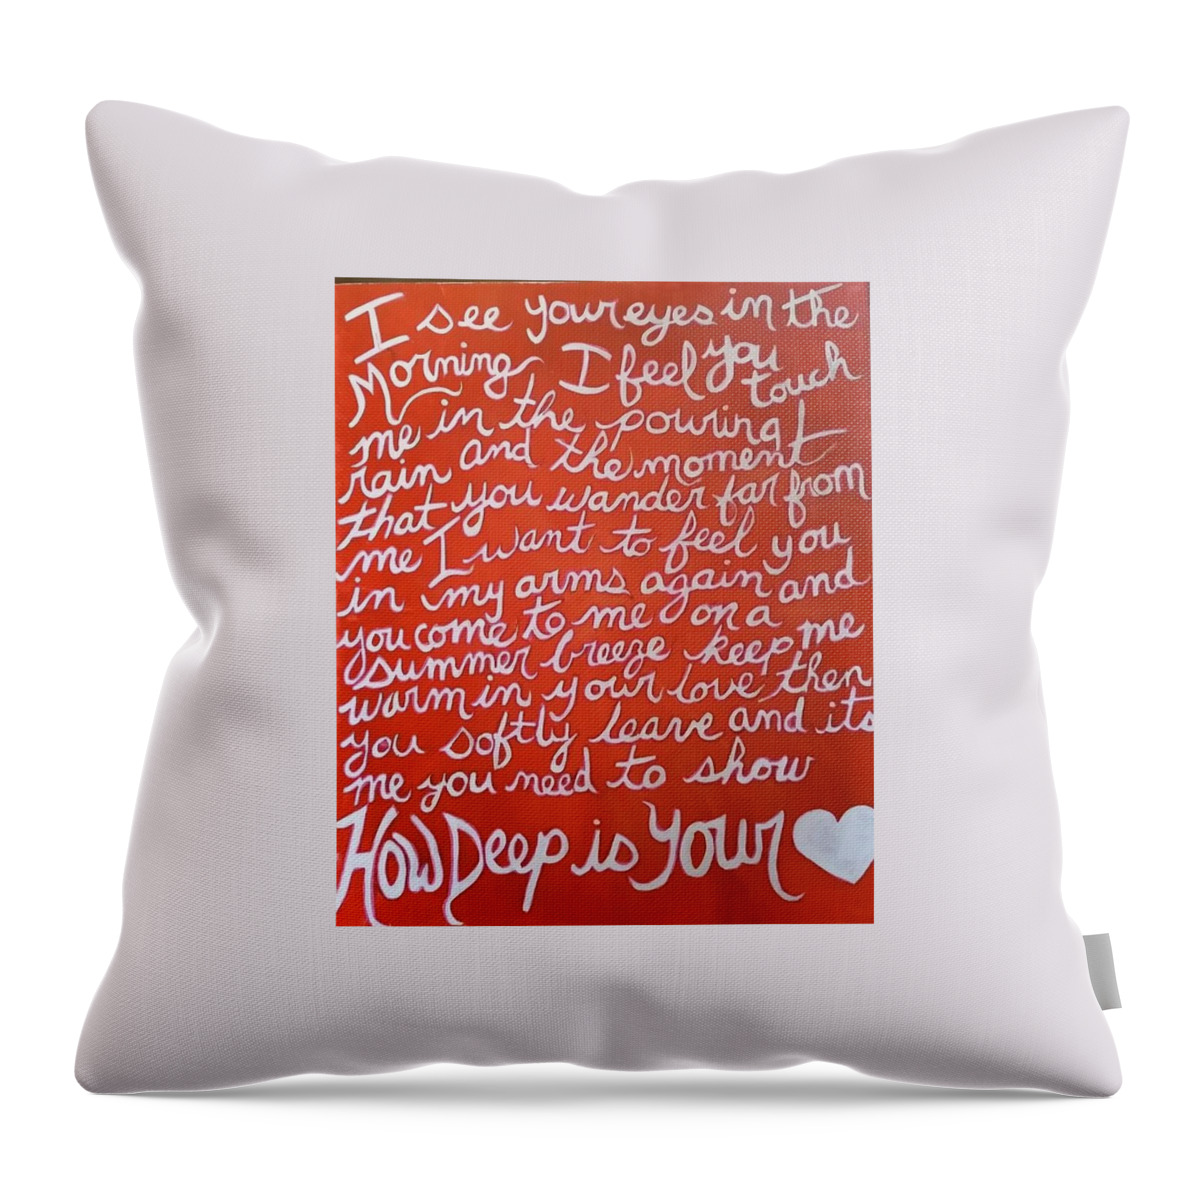 Beegees Lyrics Throw Pillow featuring the painting How deep is your love by Carole Hutchison